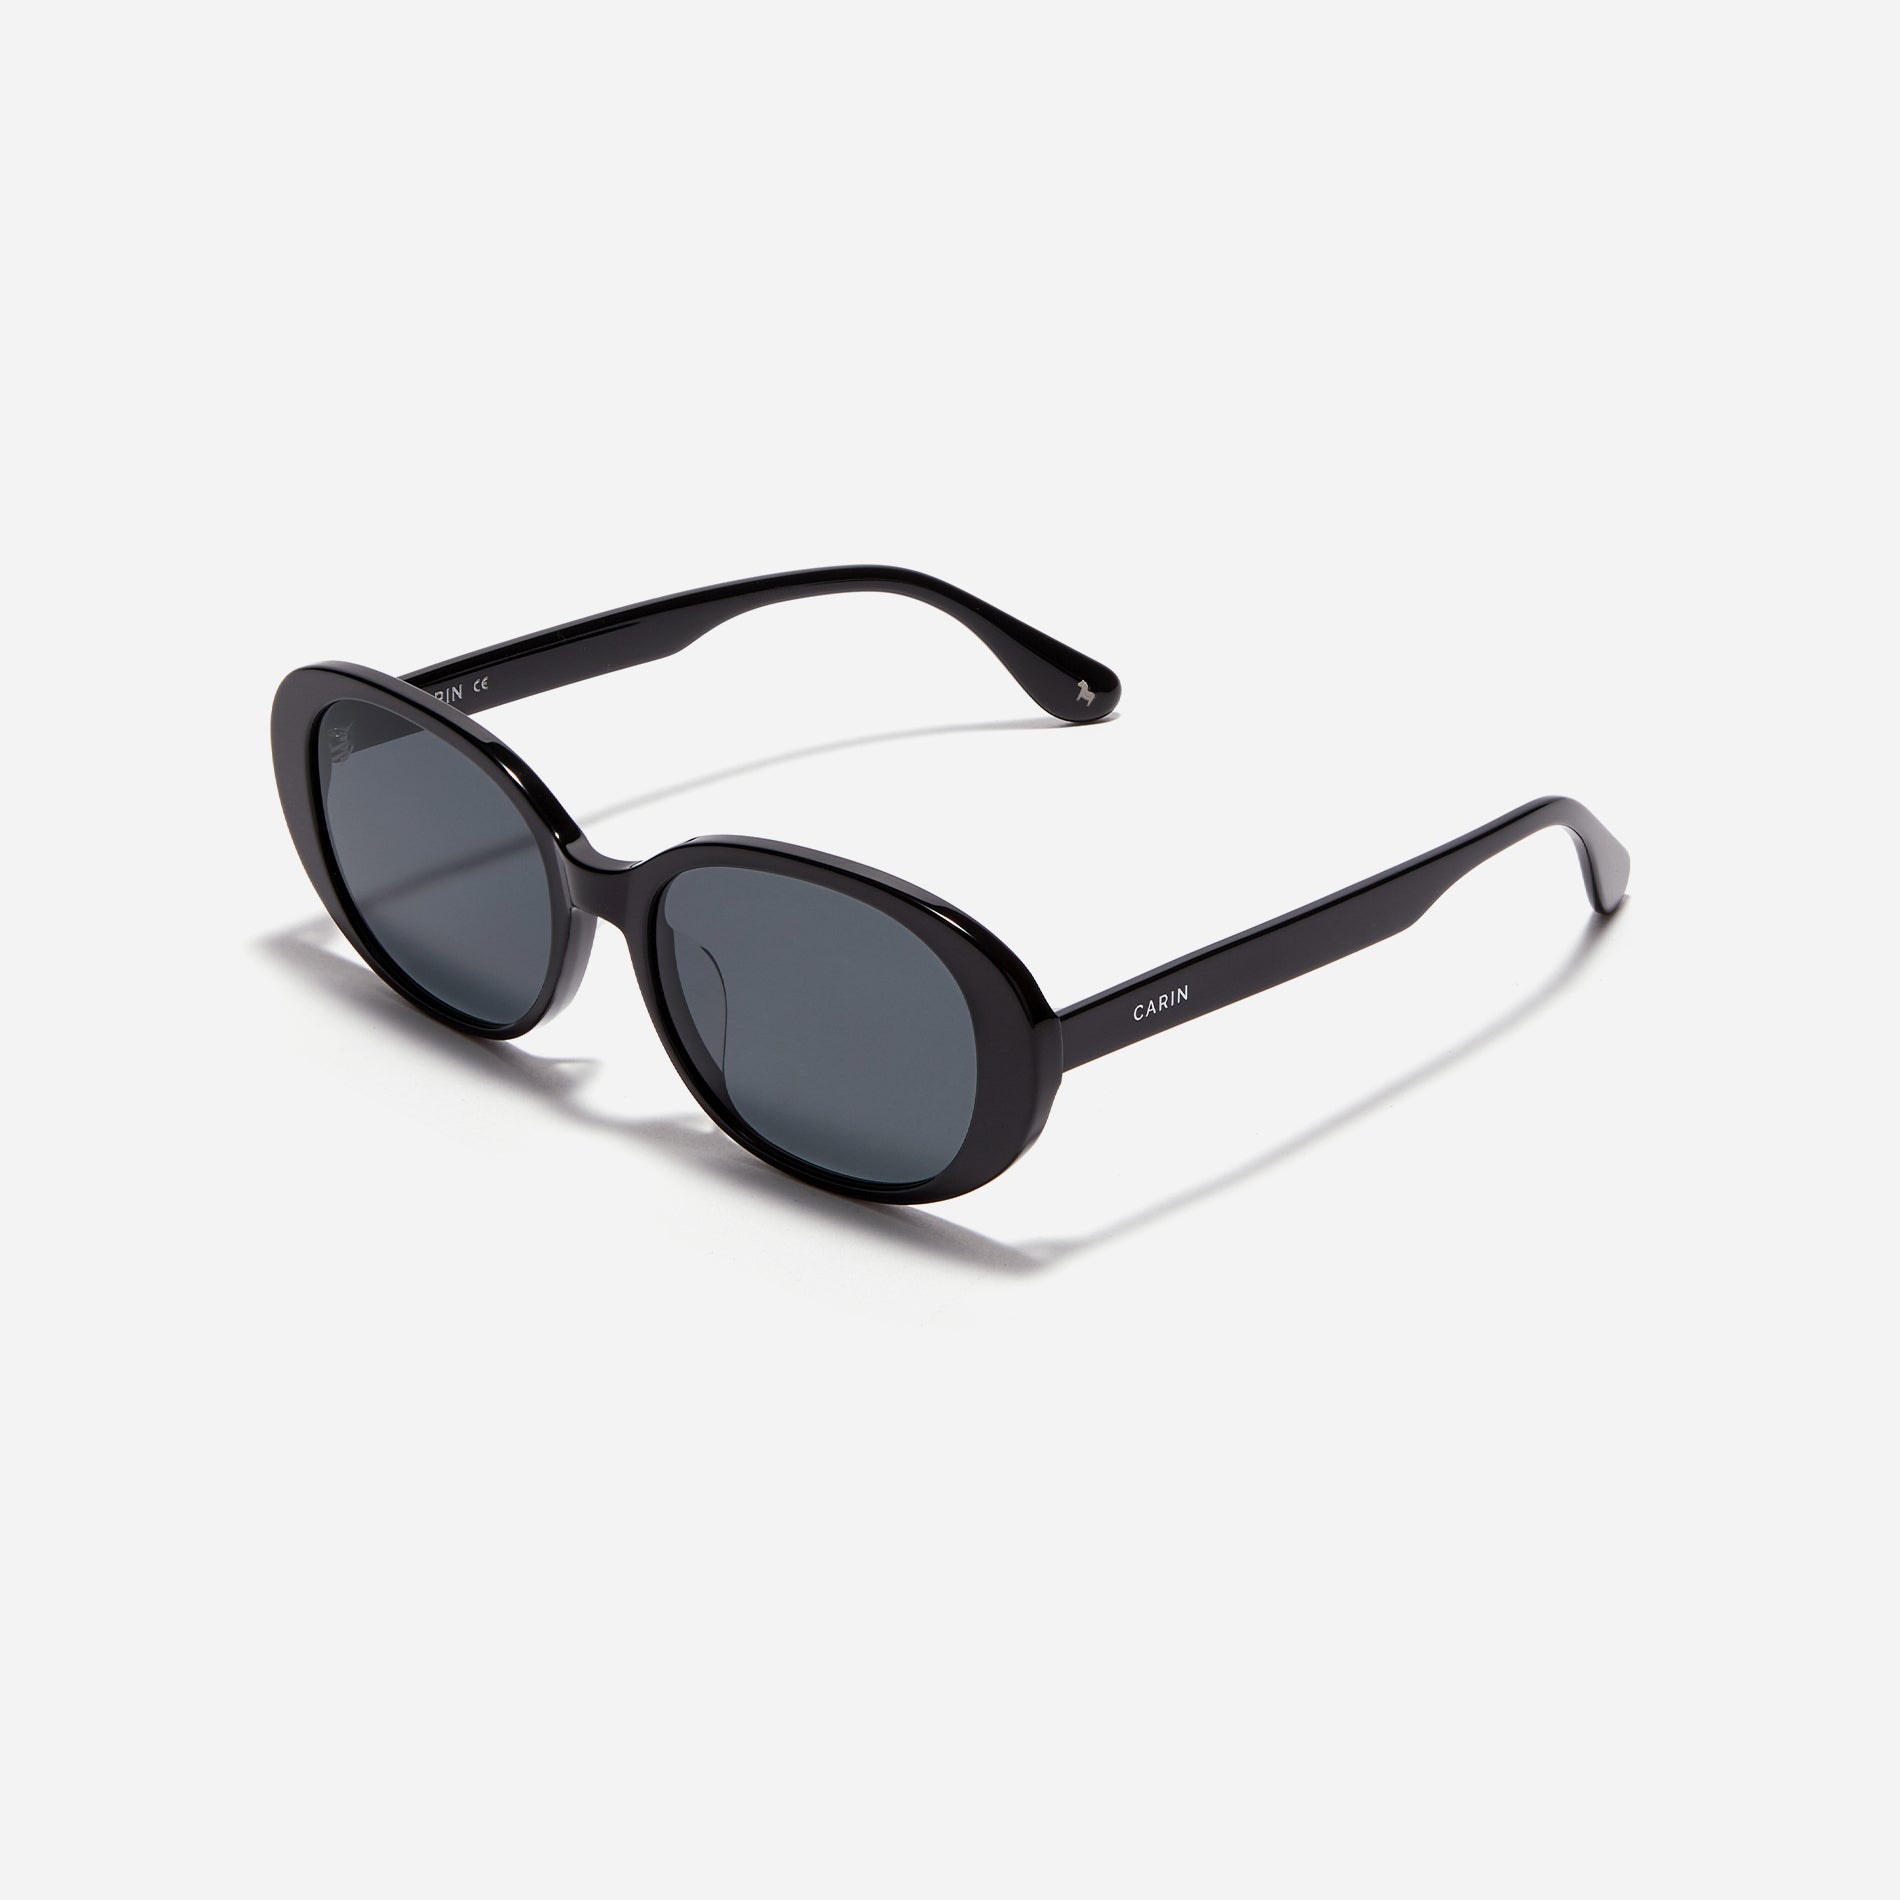 Oval-shaped petite frame sunglasses that feature a modern, unisex, and casual design that reinterprets retro sensibilities with a modern touch.